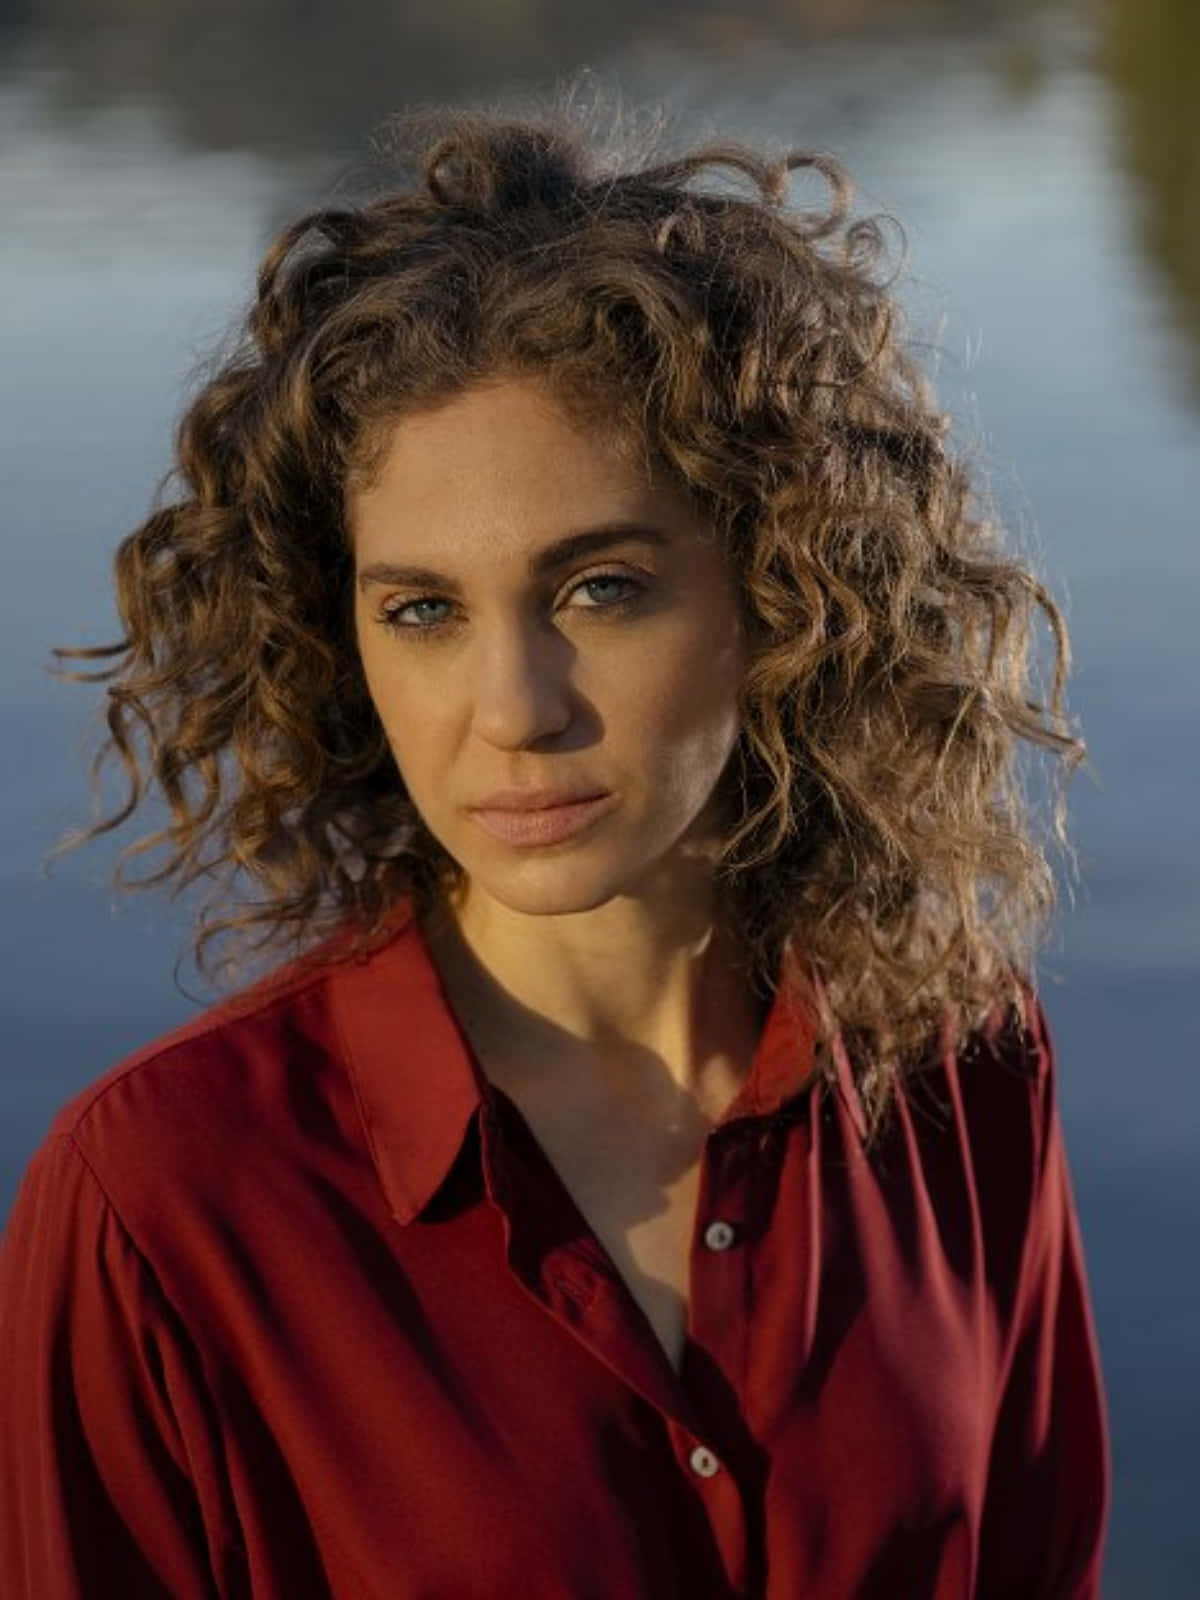 Curly Haired Womanin Red Shirt Wallpaper